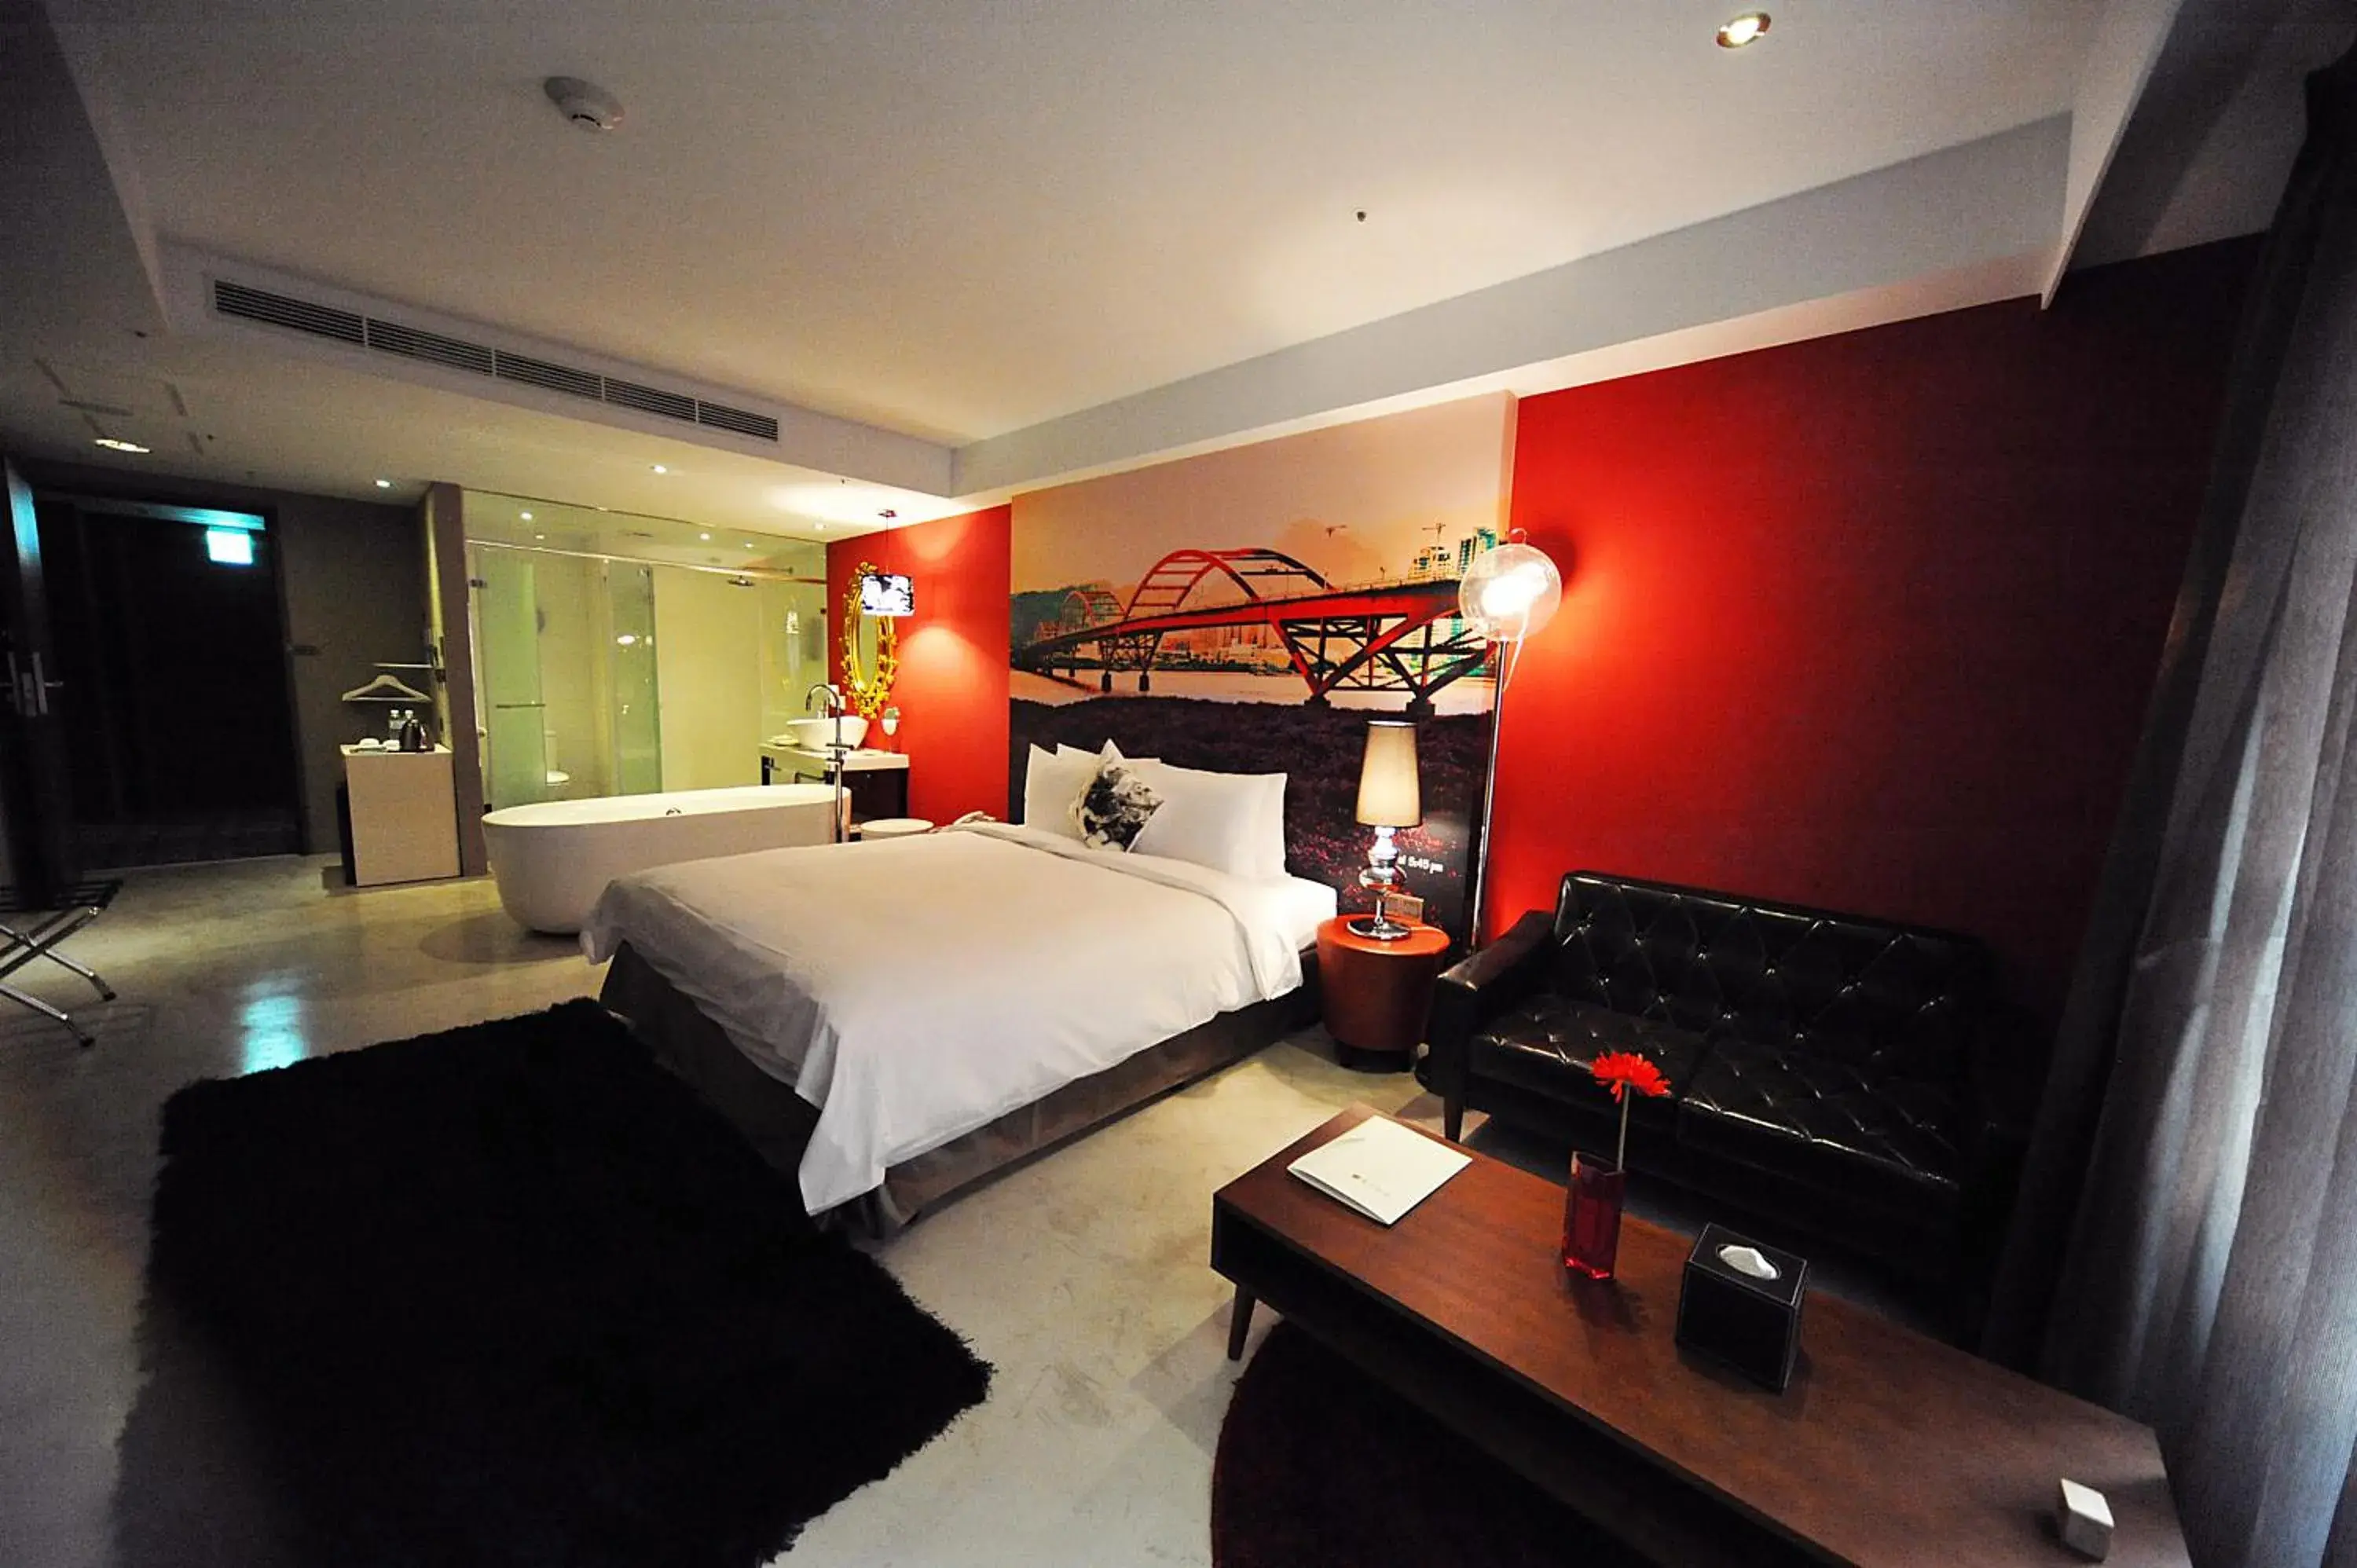 Bedroom, Room Photo in Hotelday Plus Tamsui